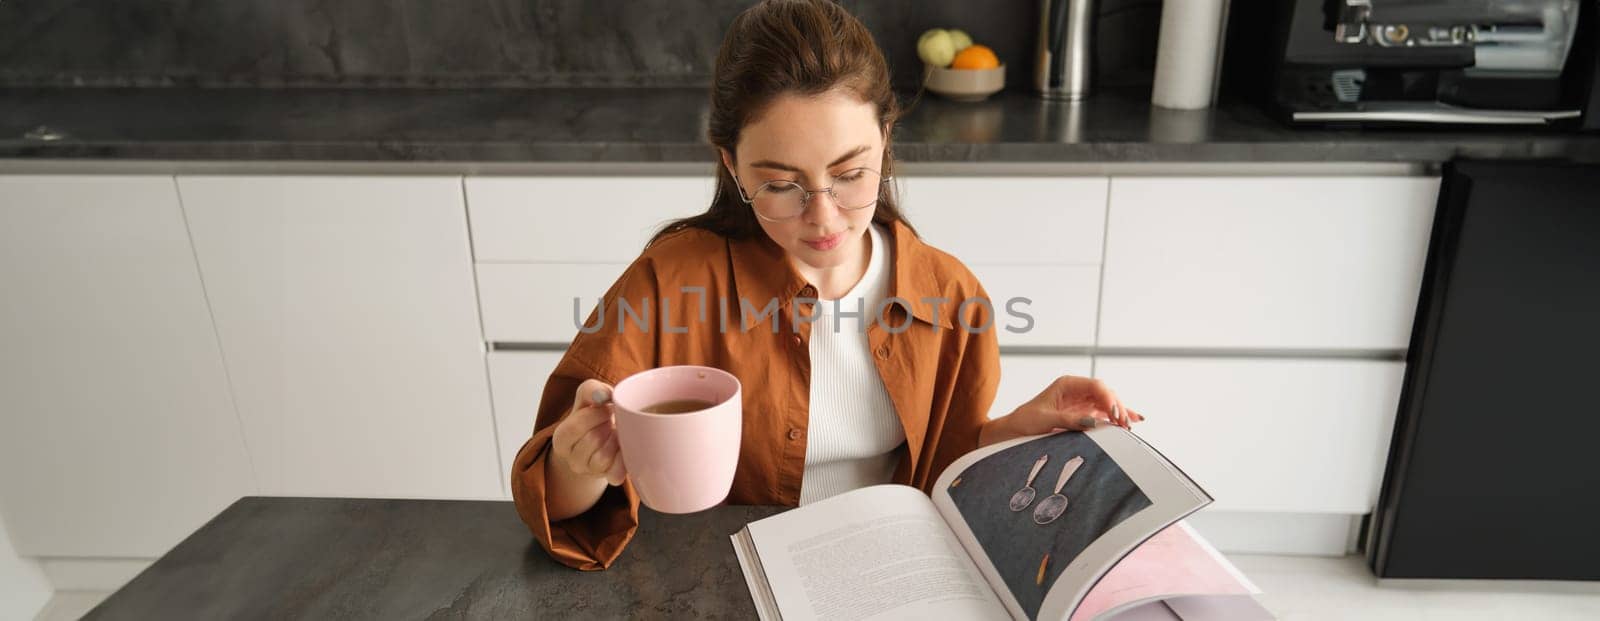 Distance learning. Young woman at home, student studying at home and drinking tea, reading her work book, revising for exam.